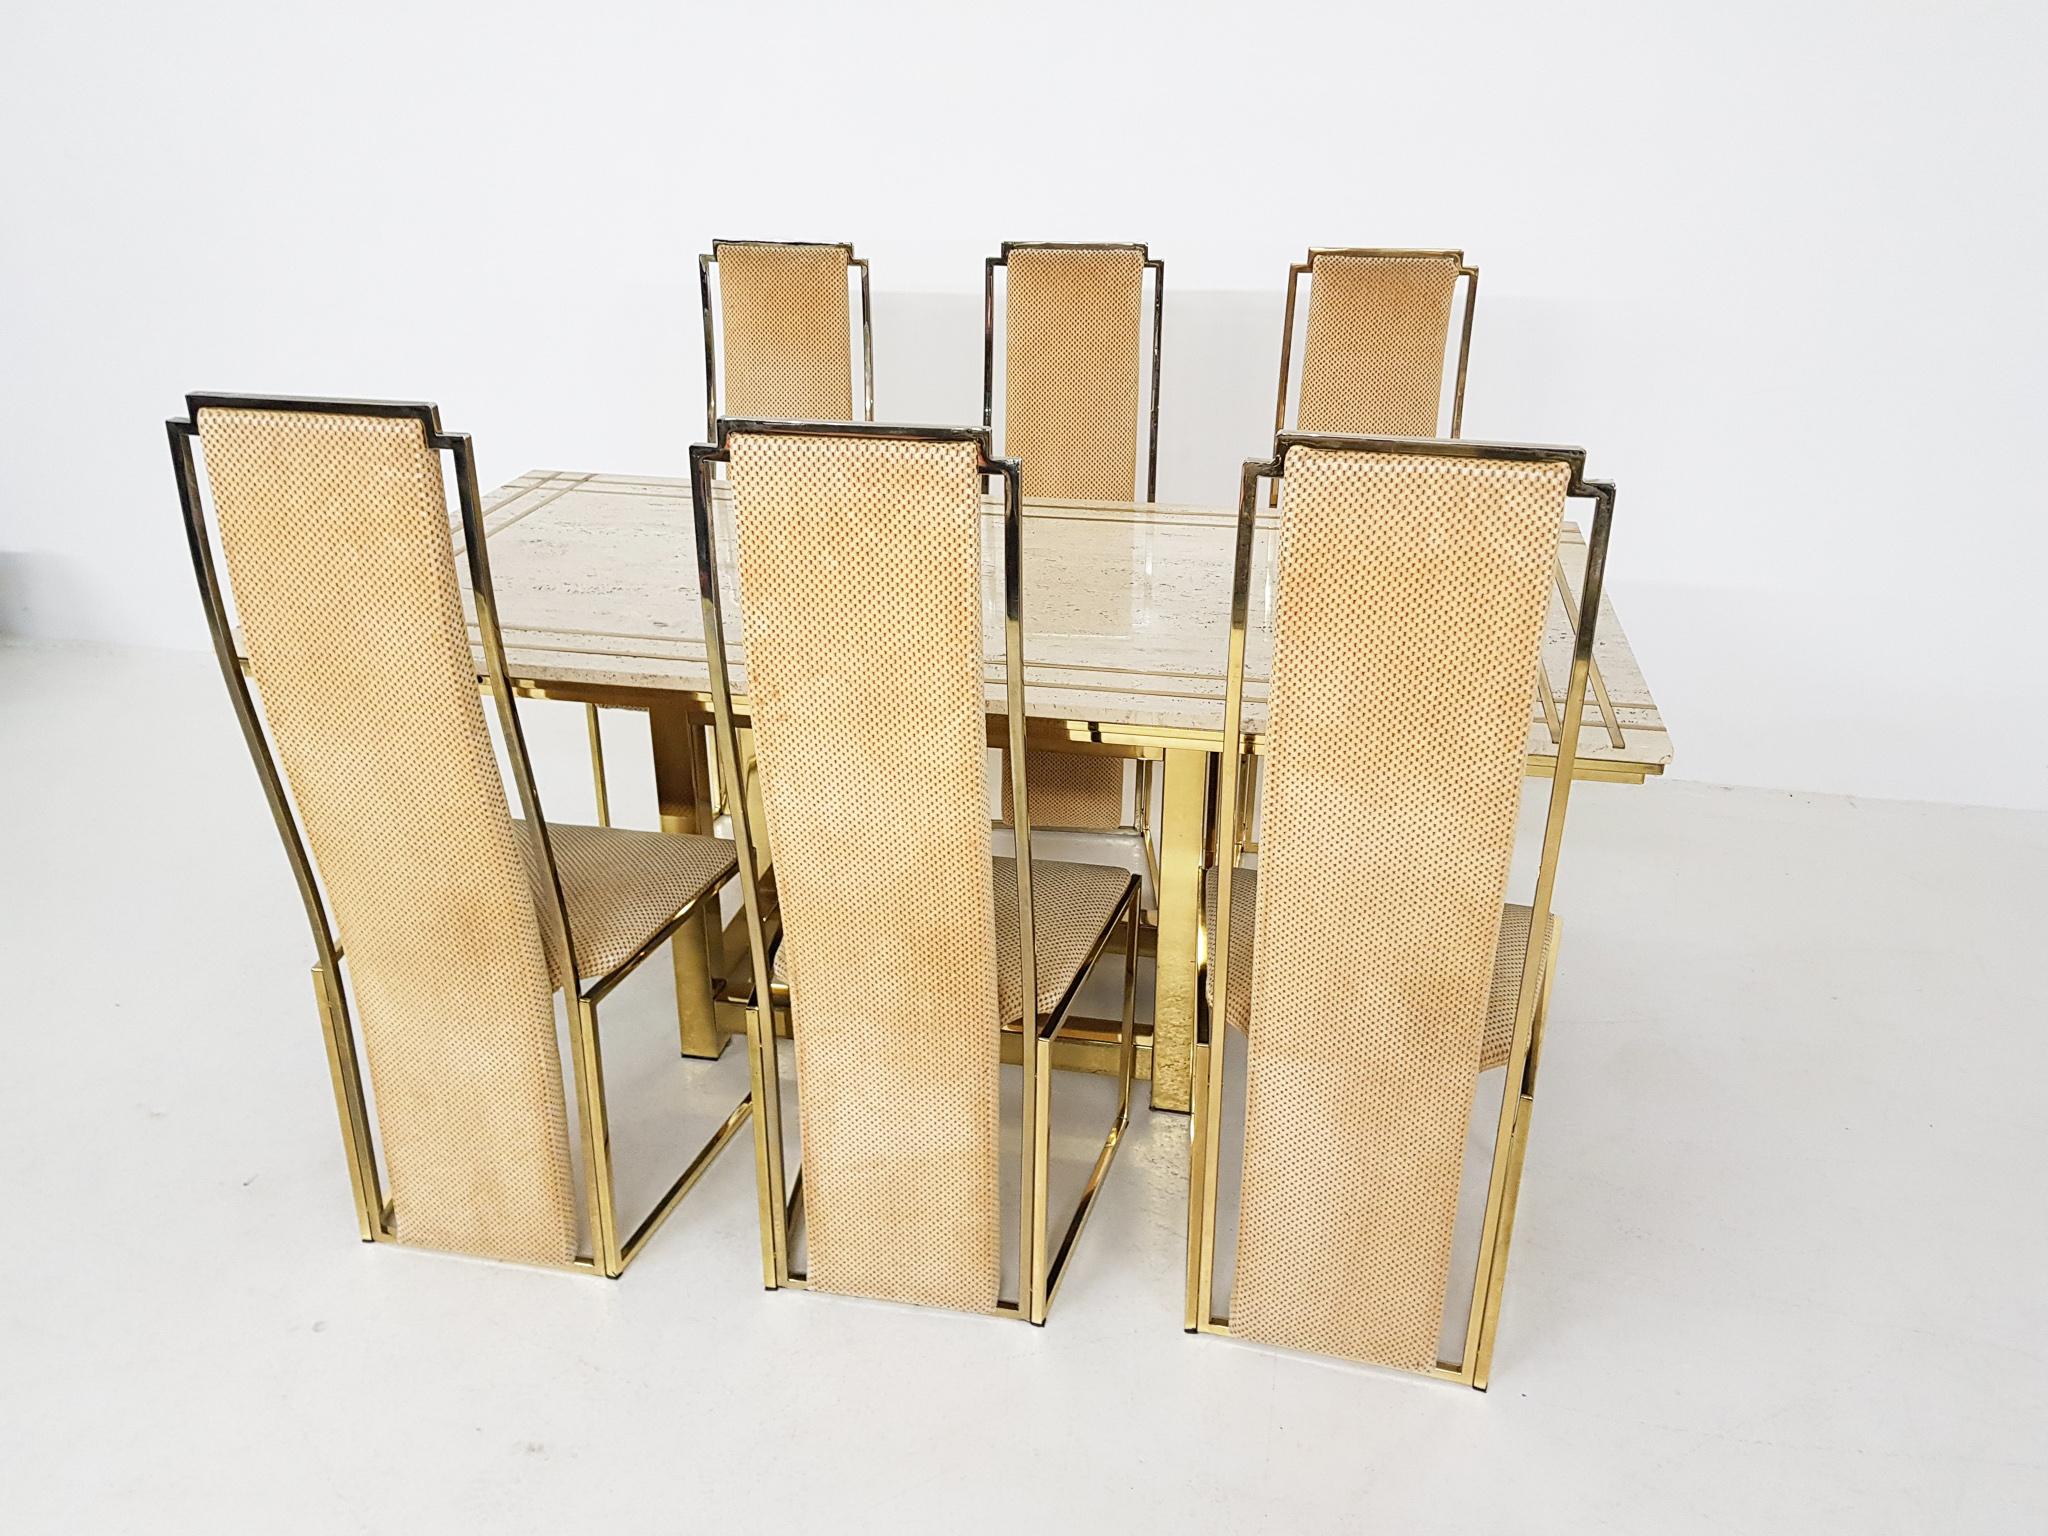 Hollywood Regency Alain Delon Travertine, Brass and Gold Dining Set, France, 1980s For Sale